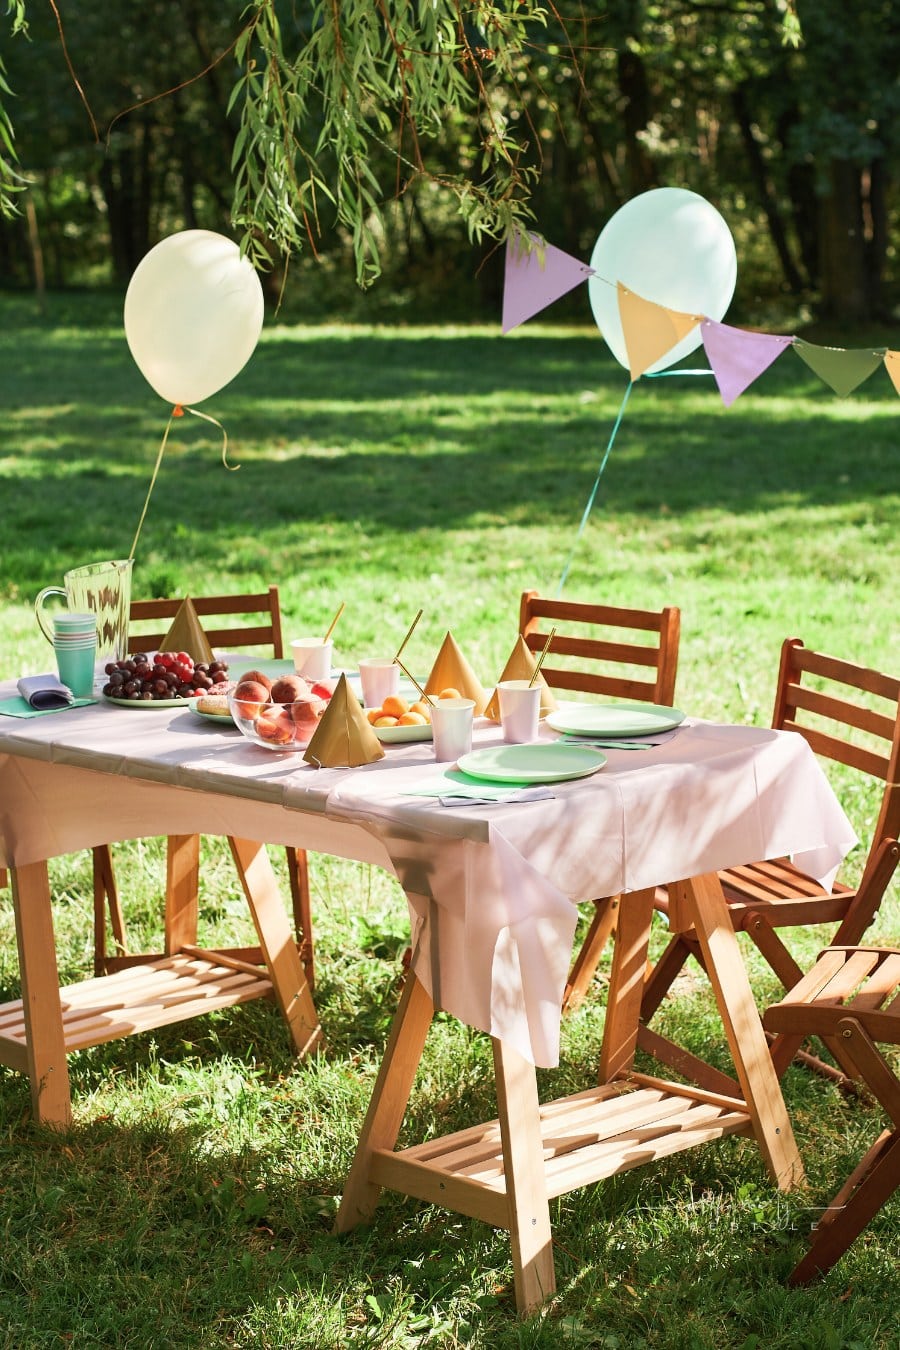 Full length background image of Summer picnic table outdoors decorated with balloons for Birthday party